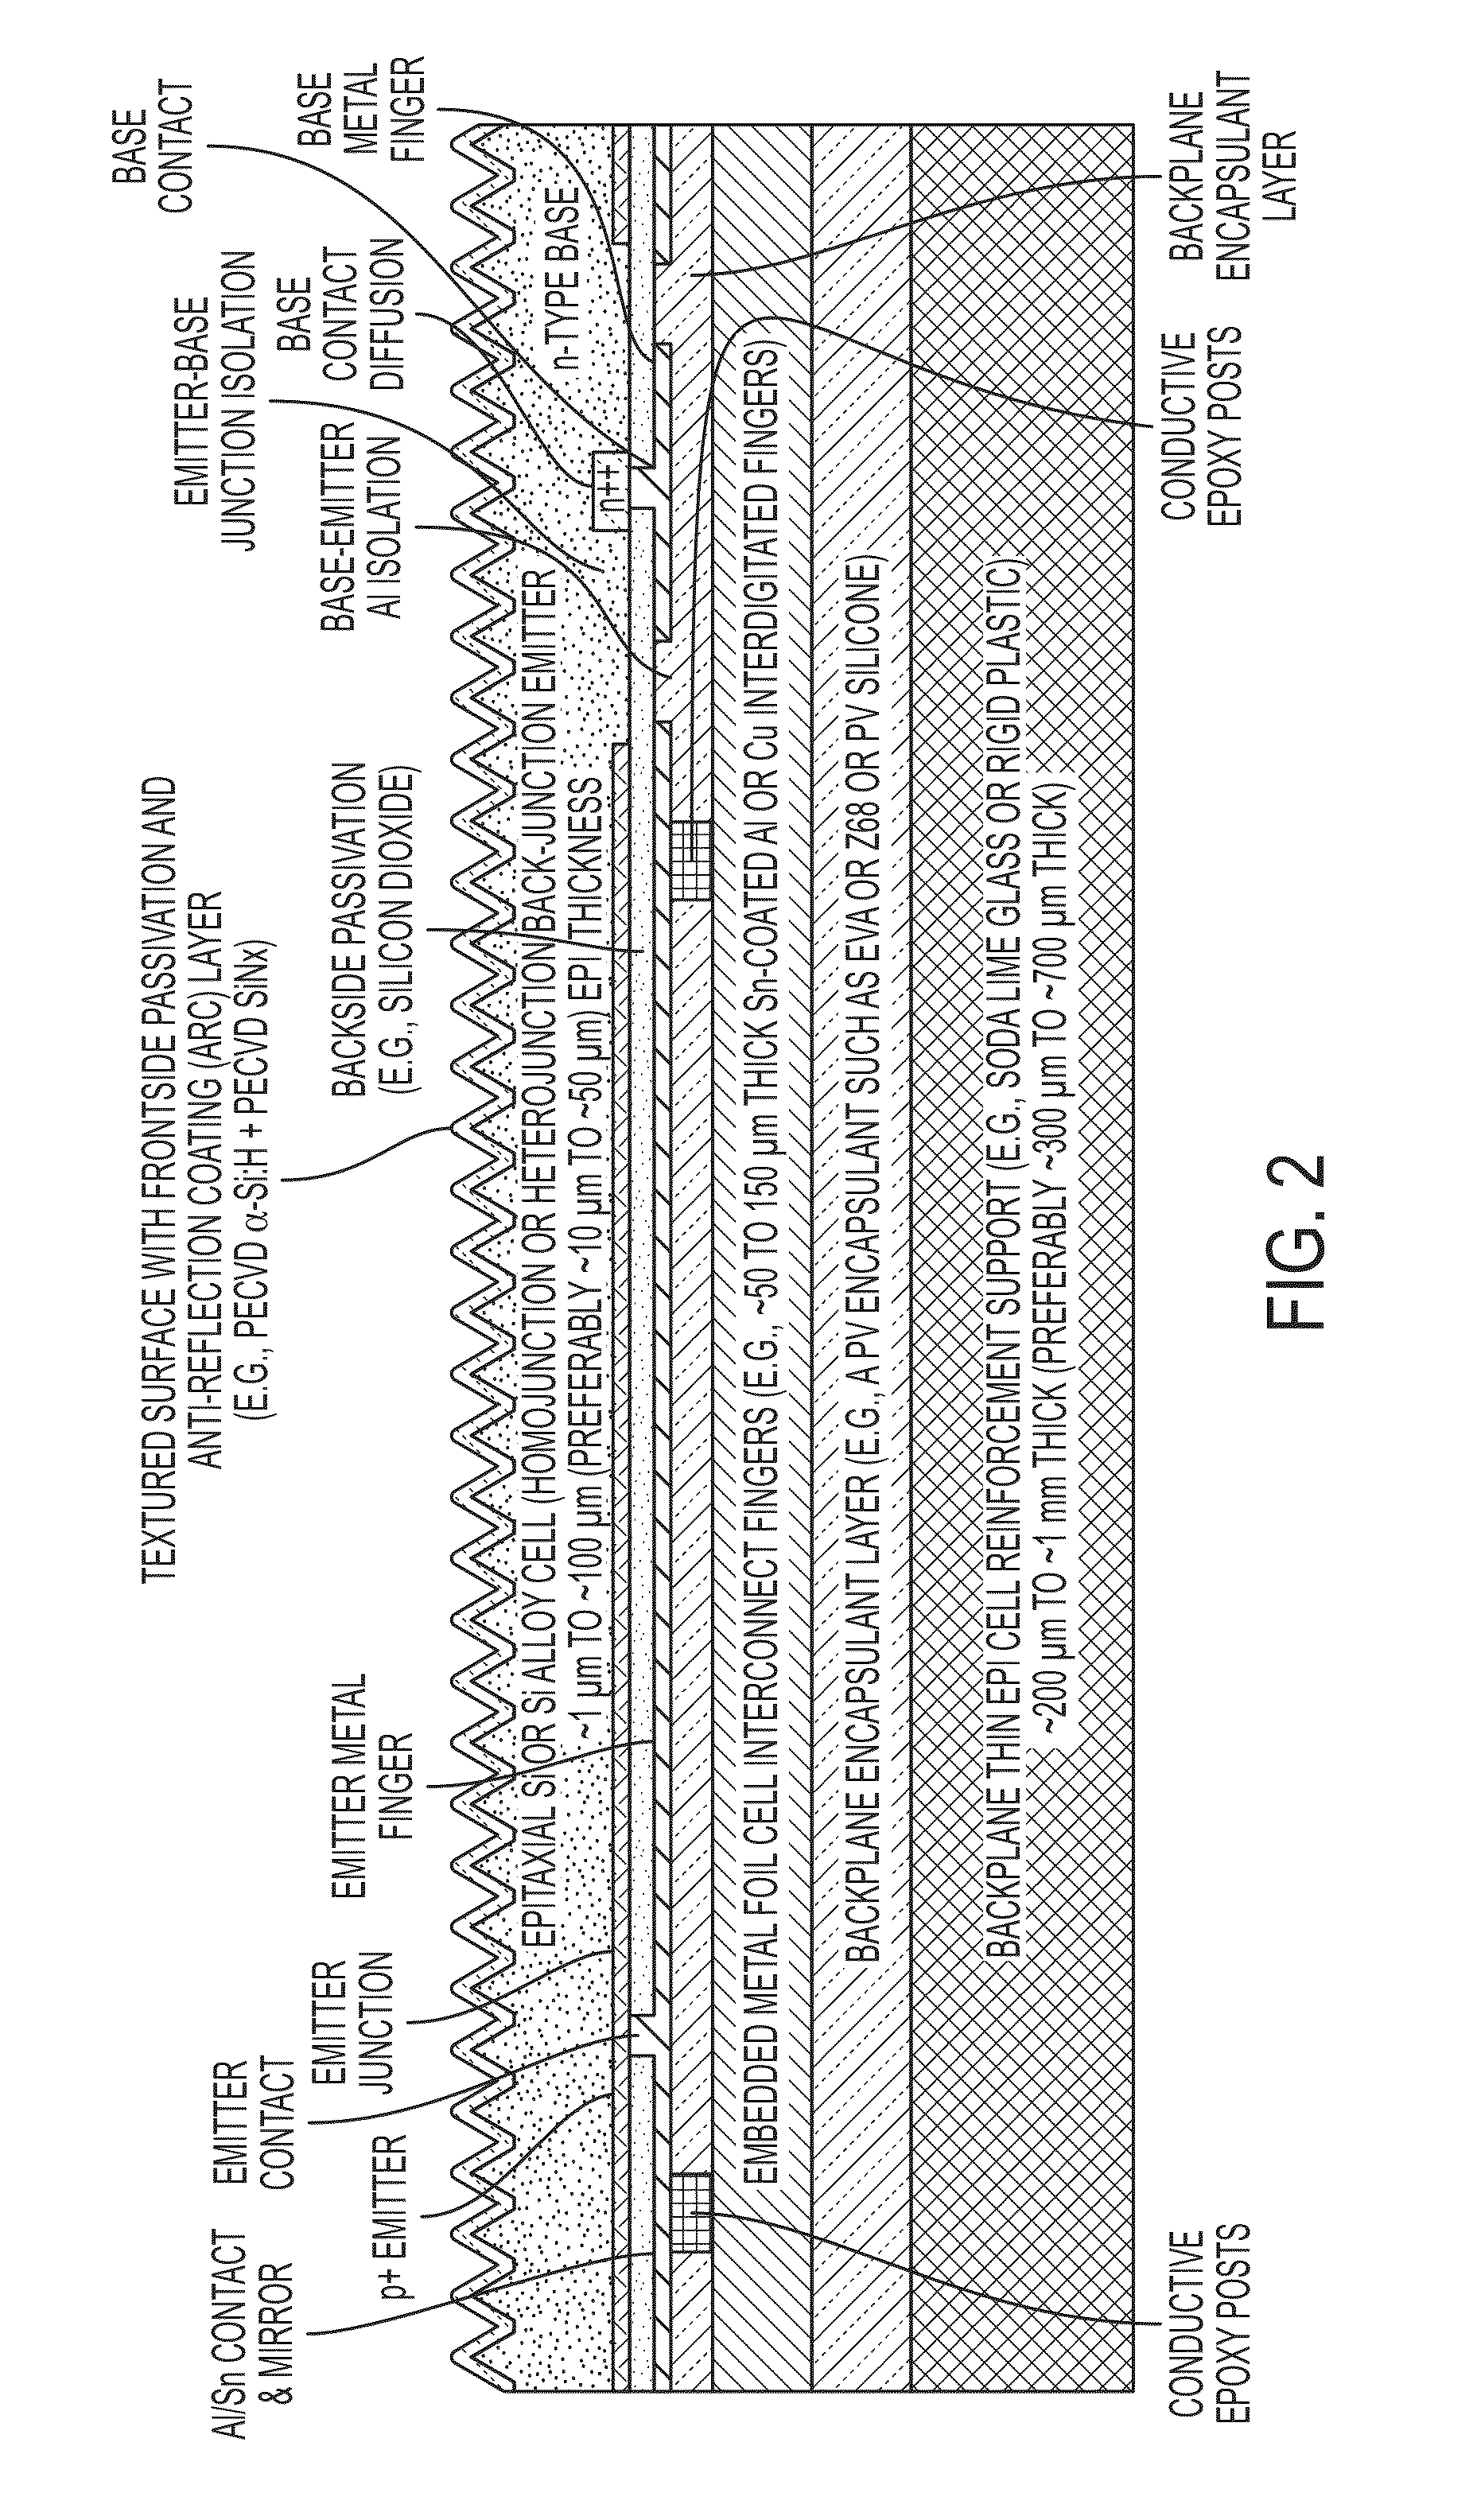 High-efficiency solar photovoltaic cells and modules using thin crystalline semiconductor absorbers